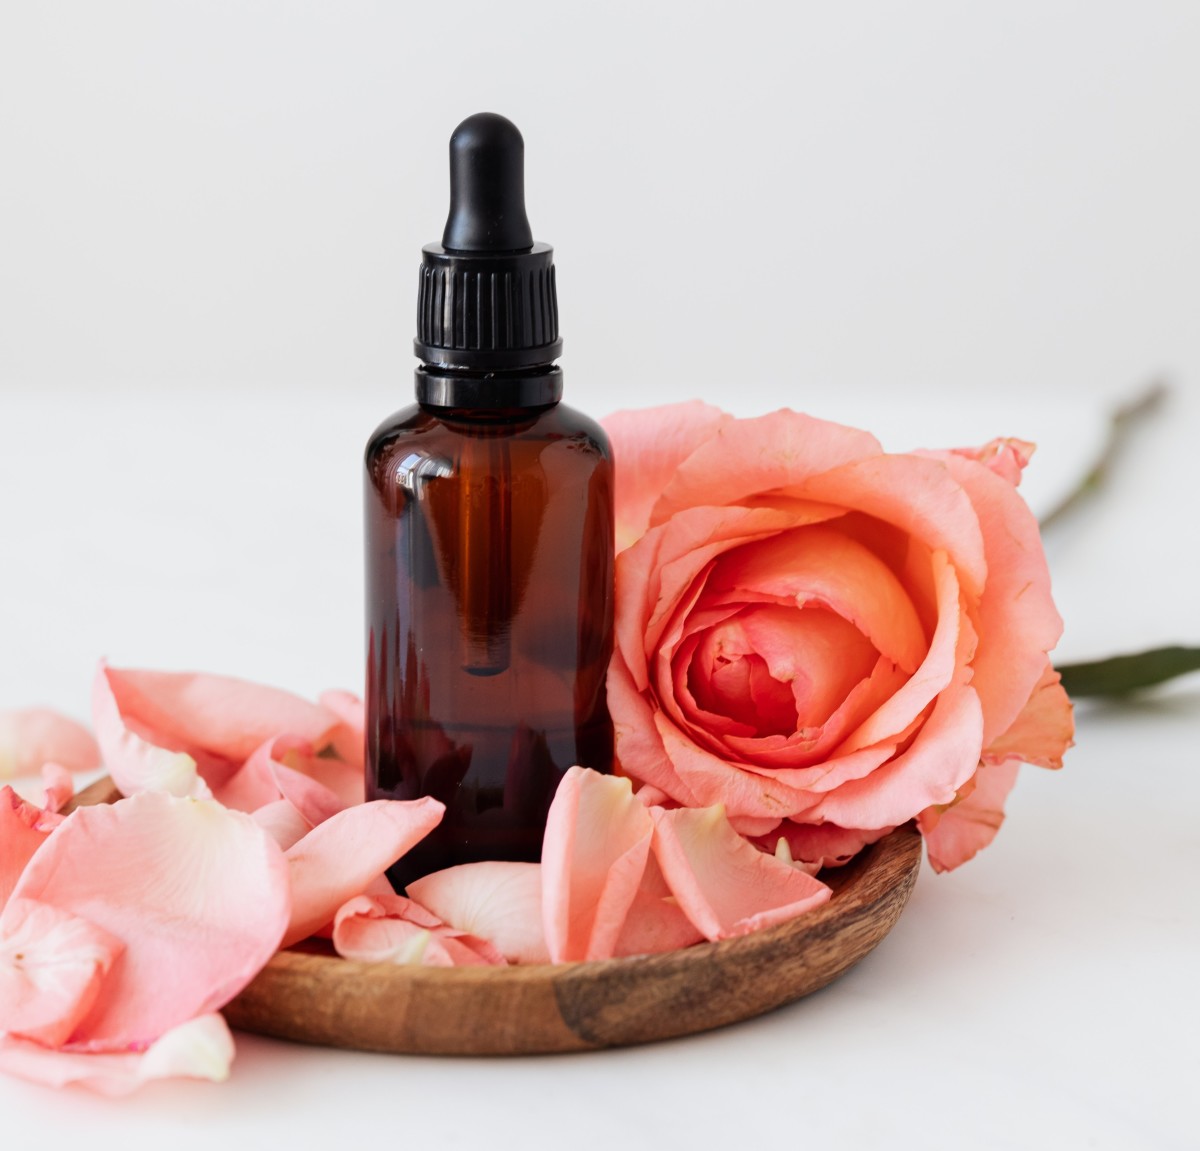 Essential oil from roses, as an example, can be a nice alternative to perfumes or colognes.